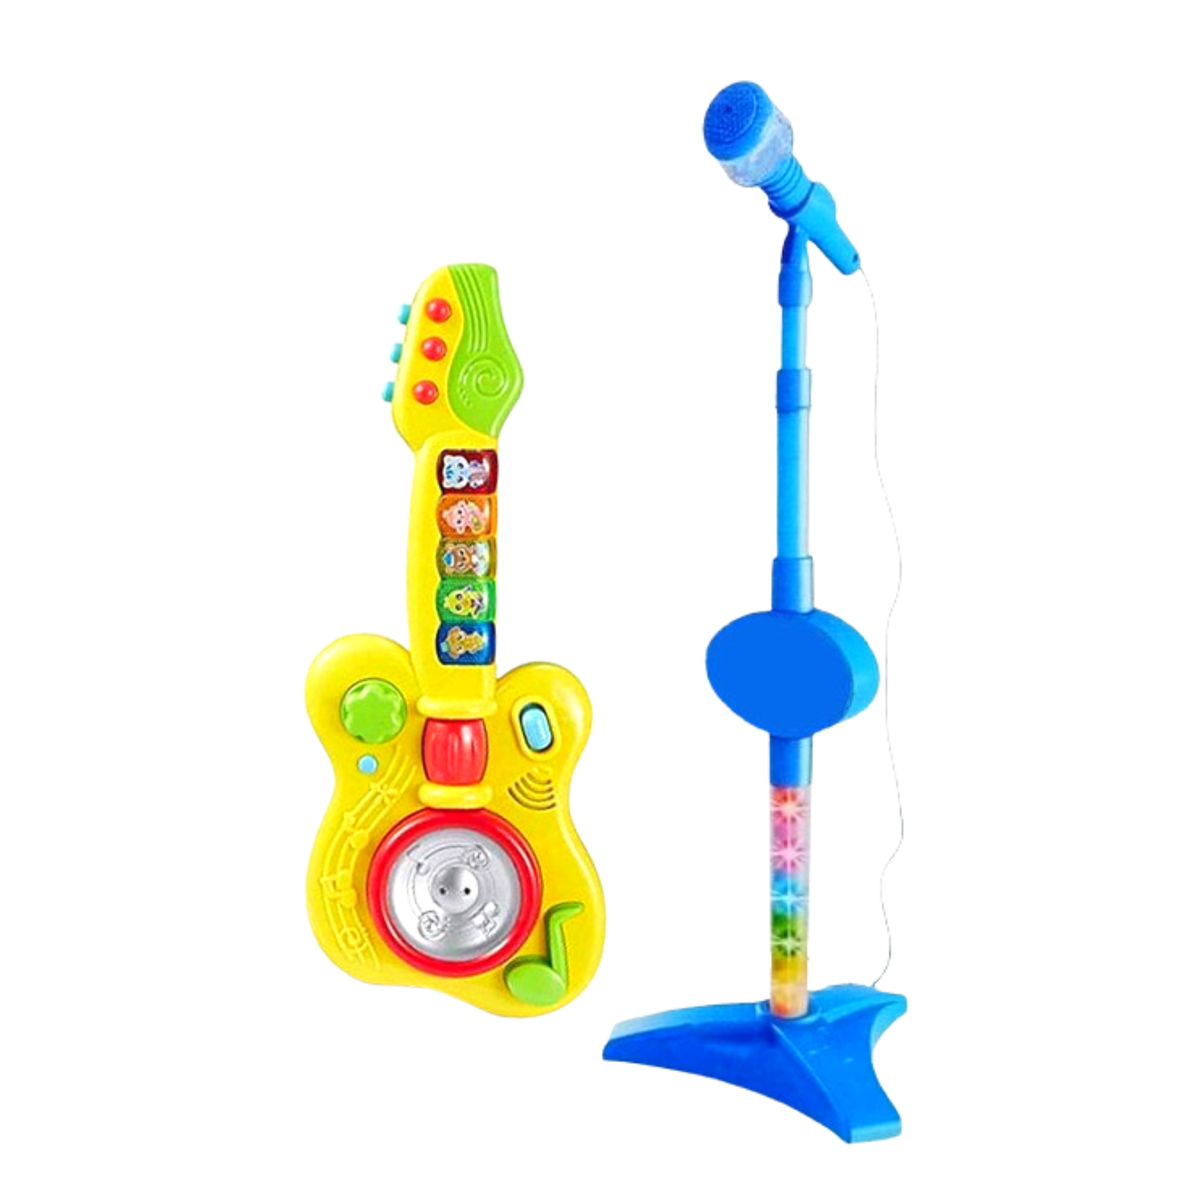 Kids Musical World 2 in 1 Microphone and Guitar | Shop Today. Get it ...